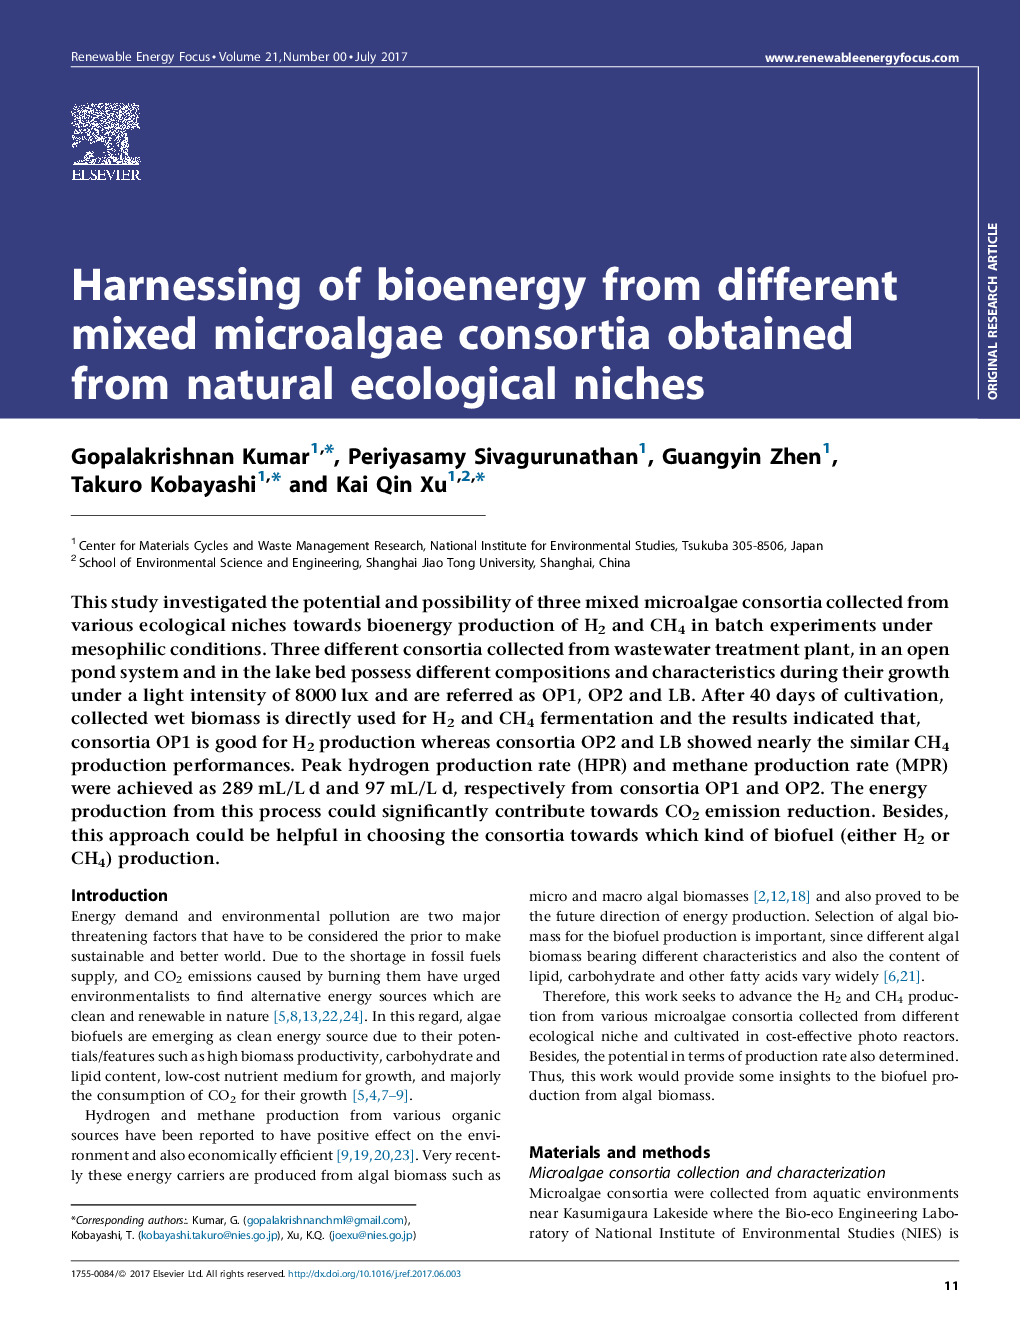 Harnessing of bioenergy from different mixed microalgae consortia obtained from natural ecological niches